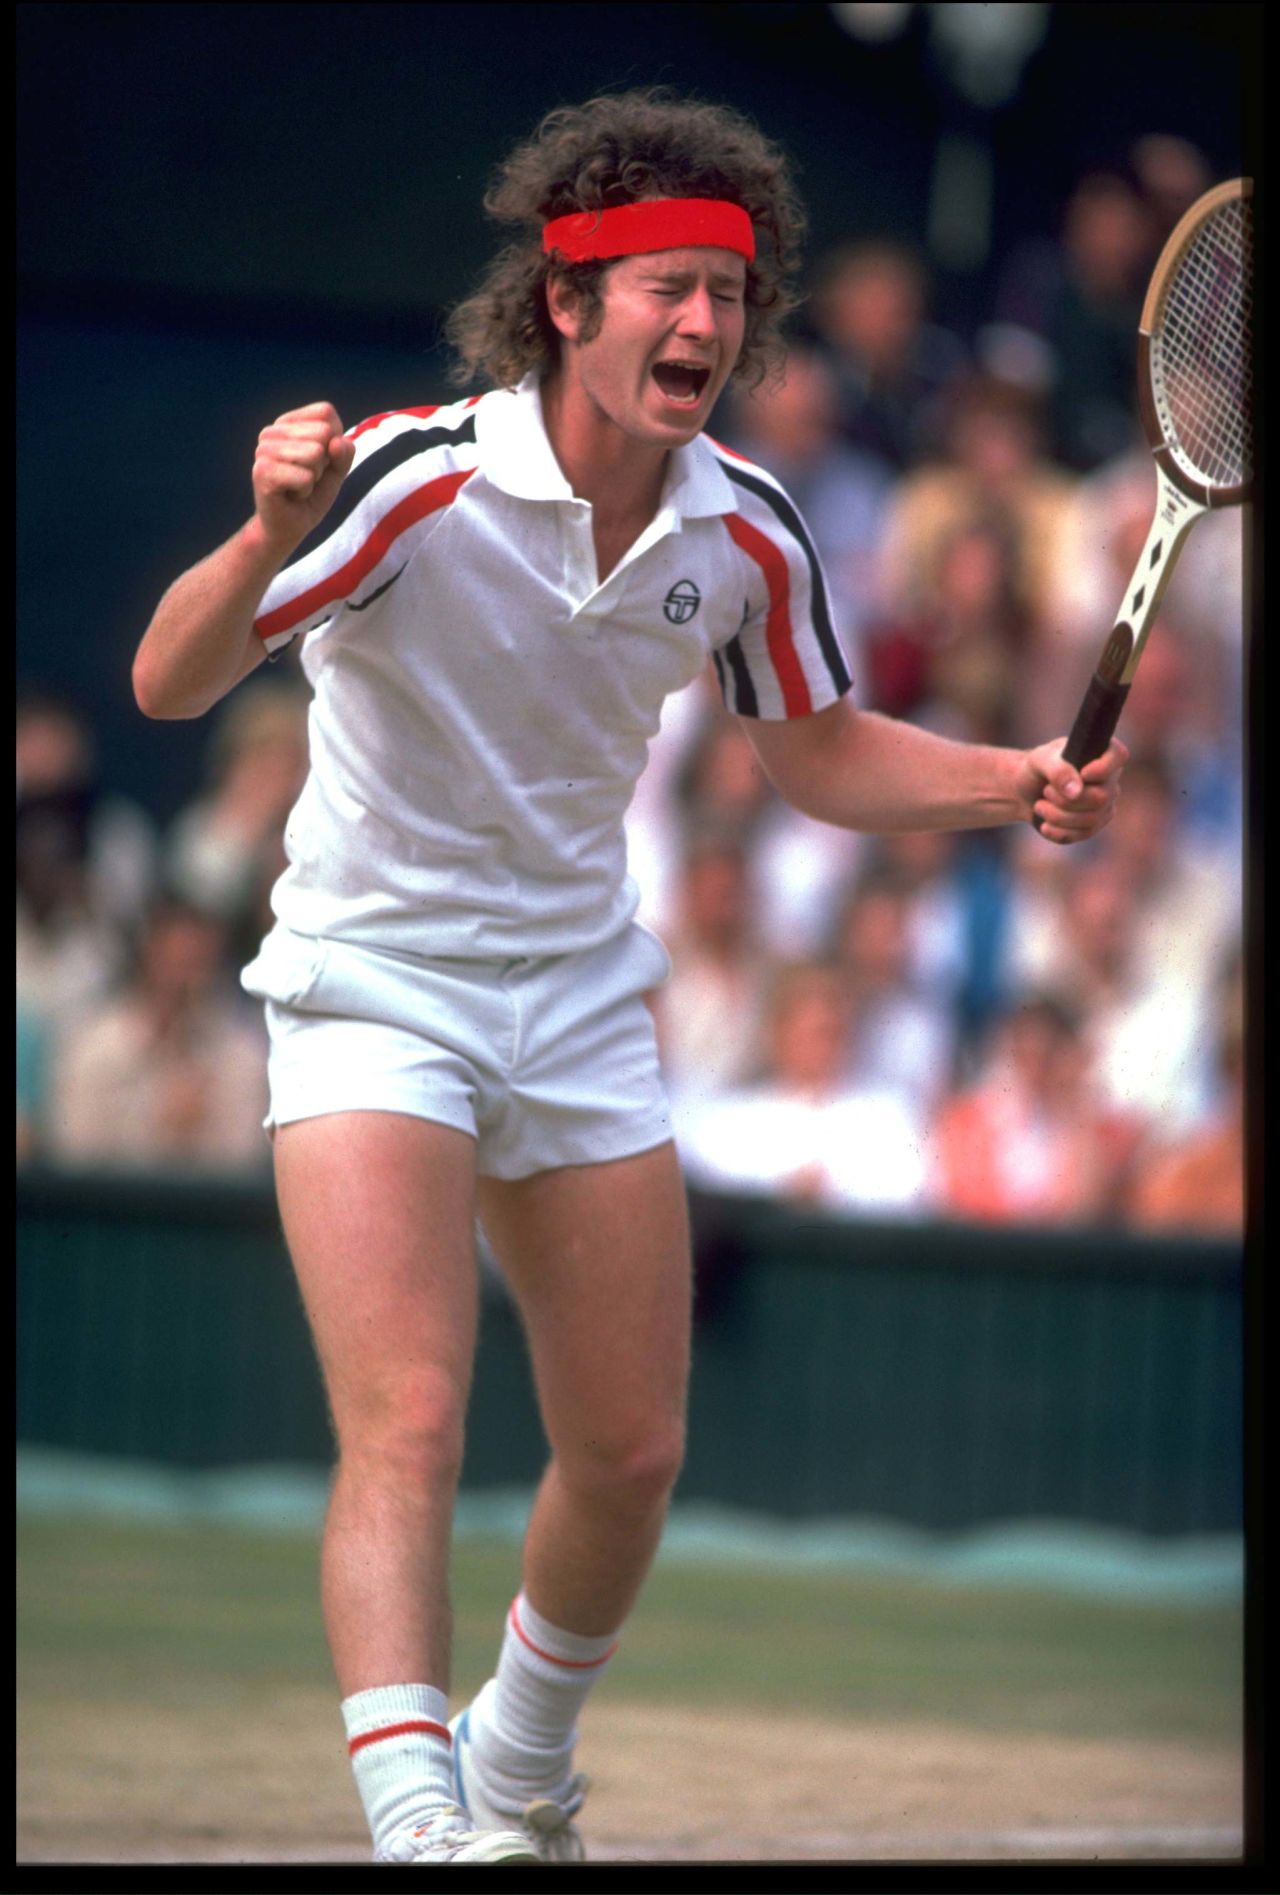 Perhaps you'd be upset too, if you had hair like this. John McEnroe lets rip during a tournament in 1980.<br />"I think a lot of people identified with McEnroe," says Rothenberg. "It was right when punk music was around, and people saw him as anti-establishment in a way they found really appealing and relatable -- even though it was a love-hate relationship at times."